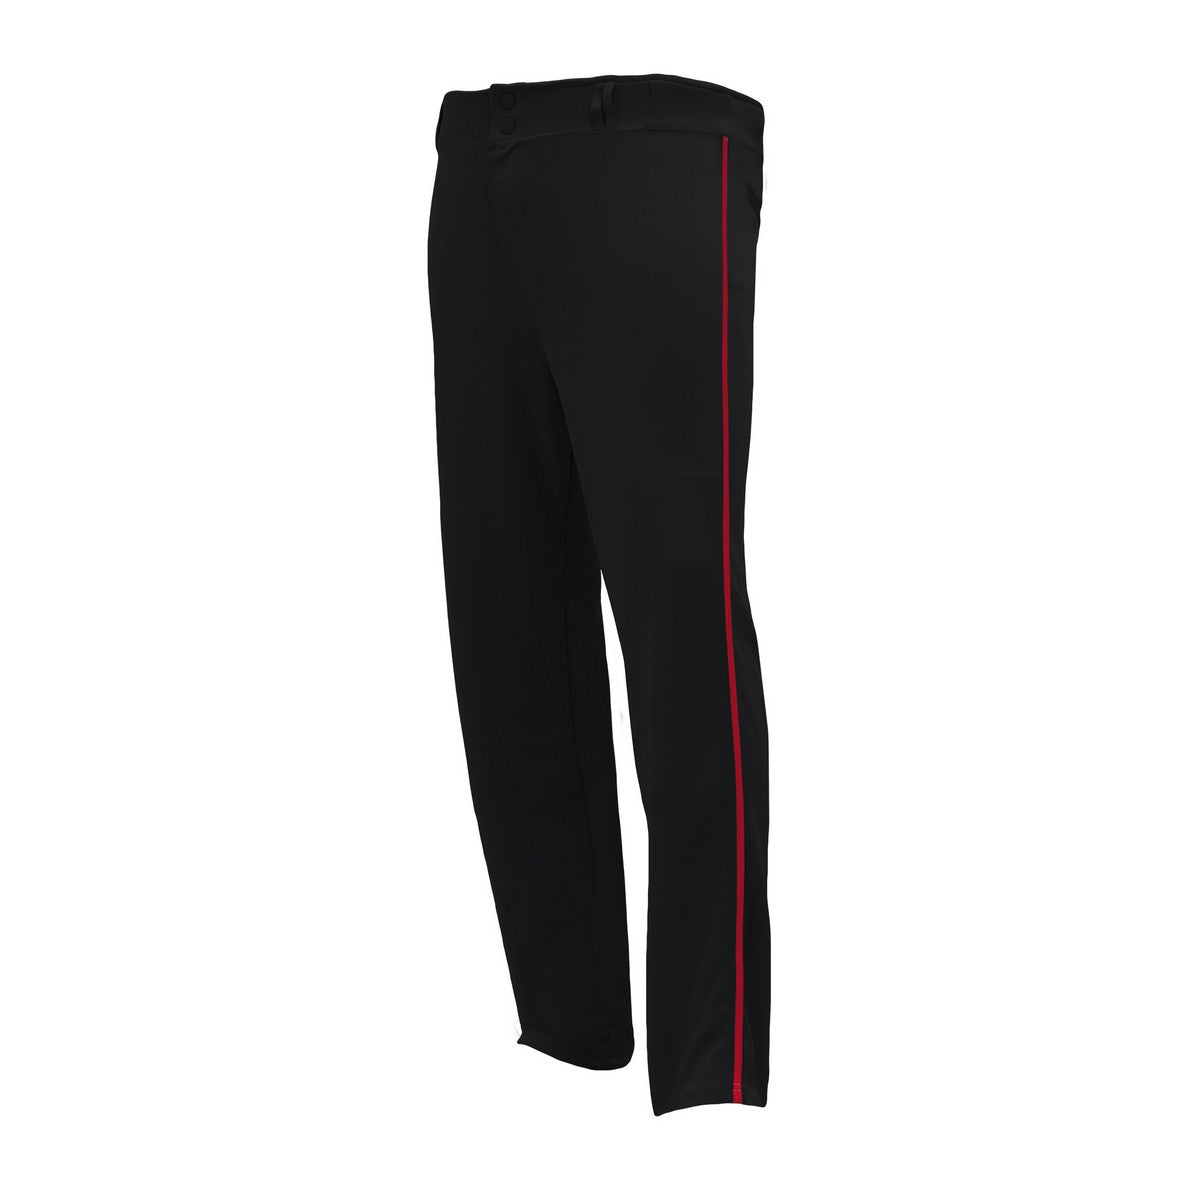 Prostar Black and Red Piped Pant